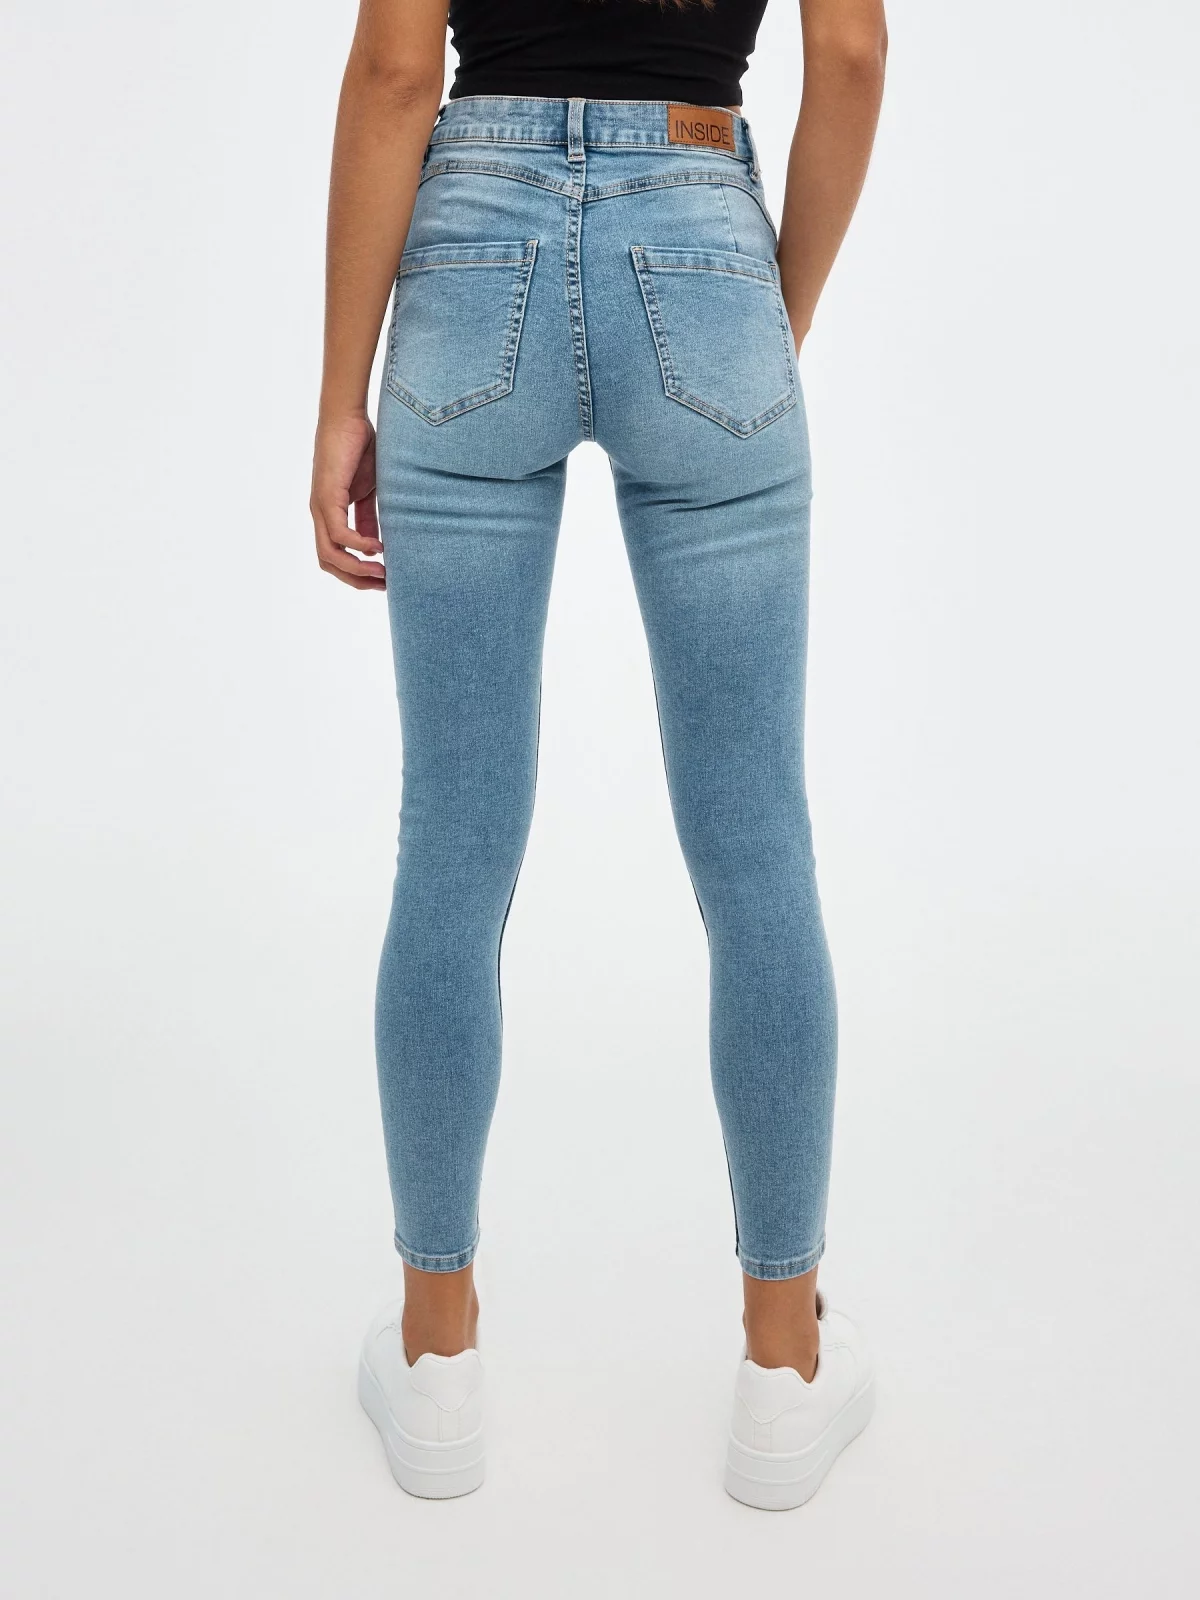 Jeans mid rise skinny push up light blue middle back view